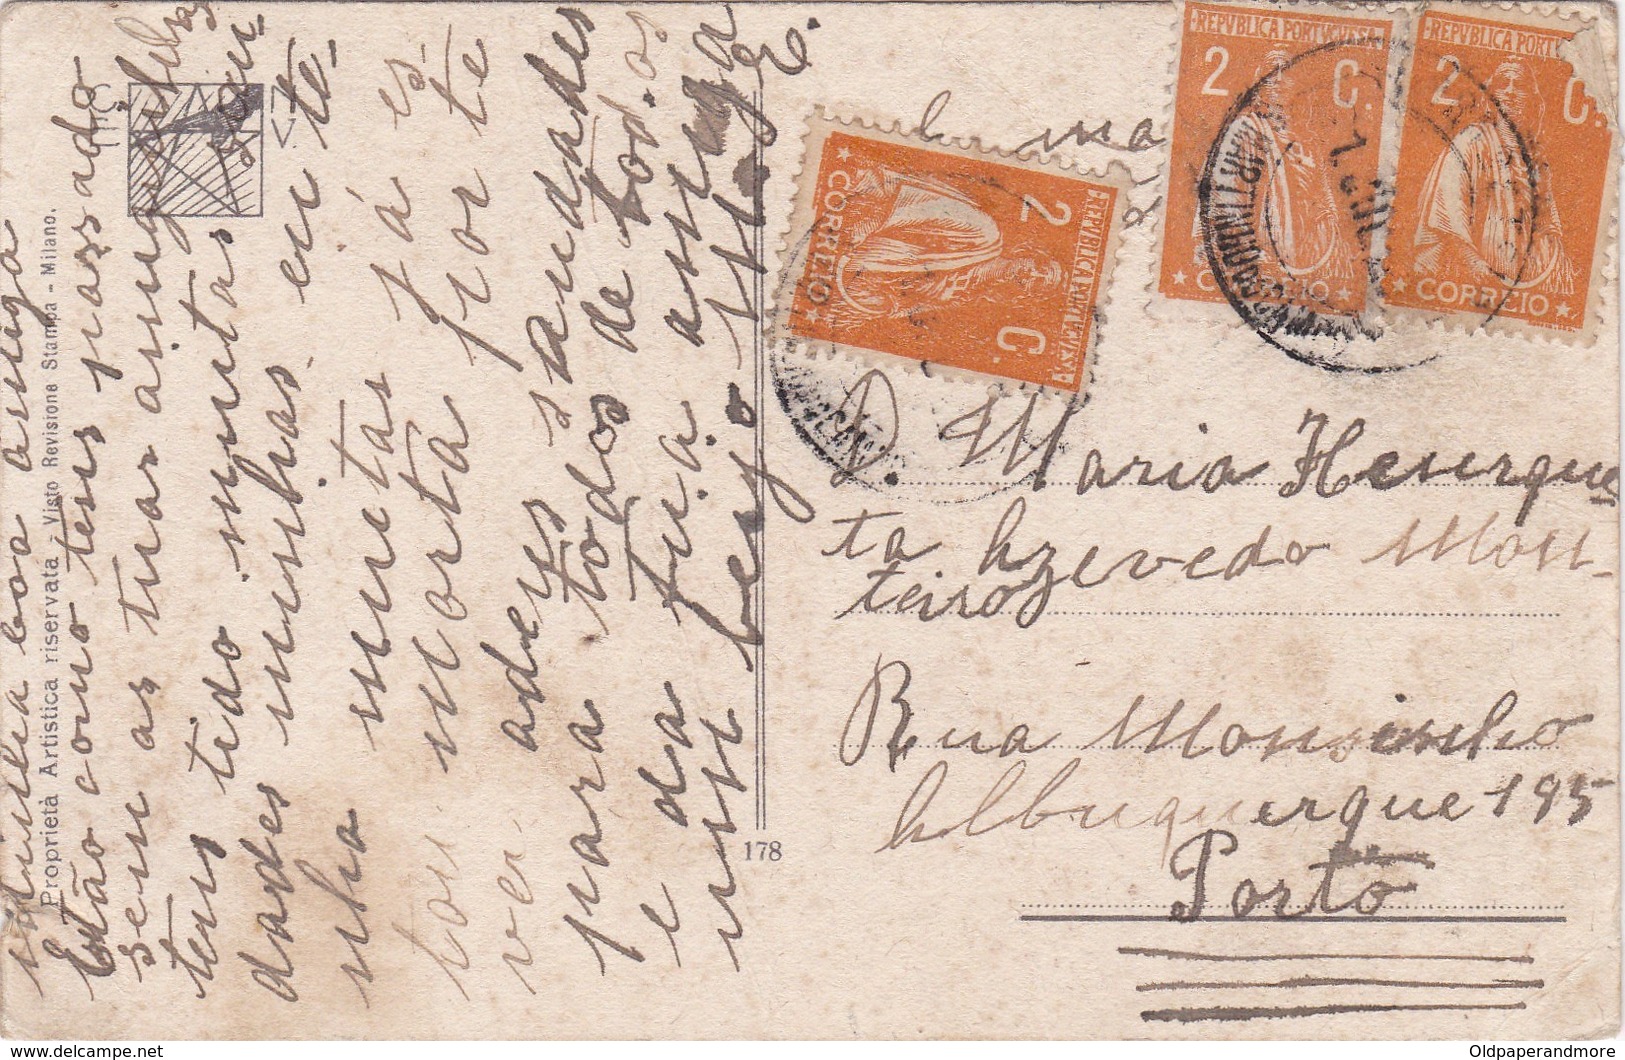 POSTCARD ILLUSTRATOR - COLOMBO - CIRCULATED IN PORTUGAL - CERES STAMPS - Colombo, E.